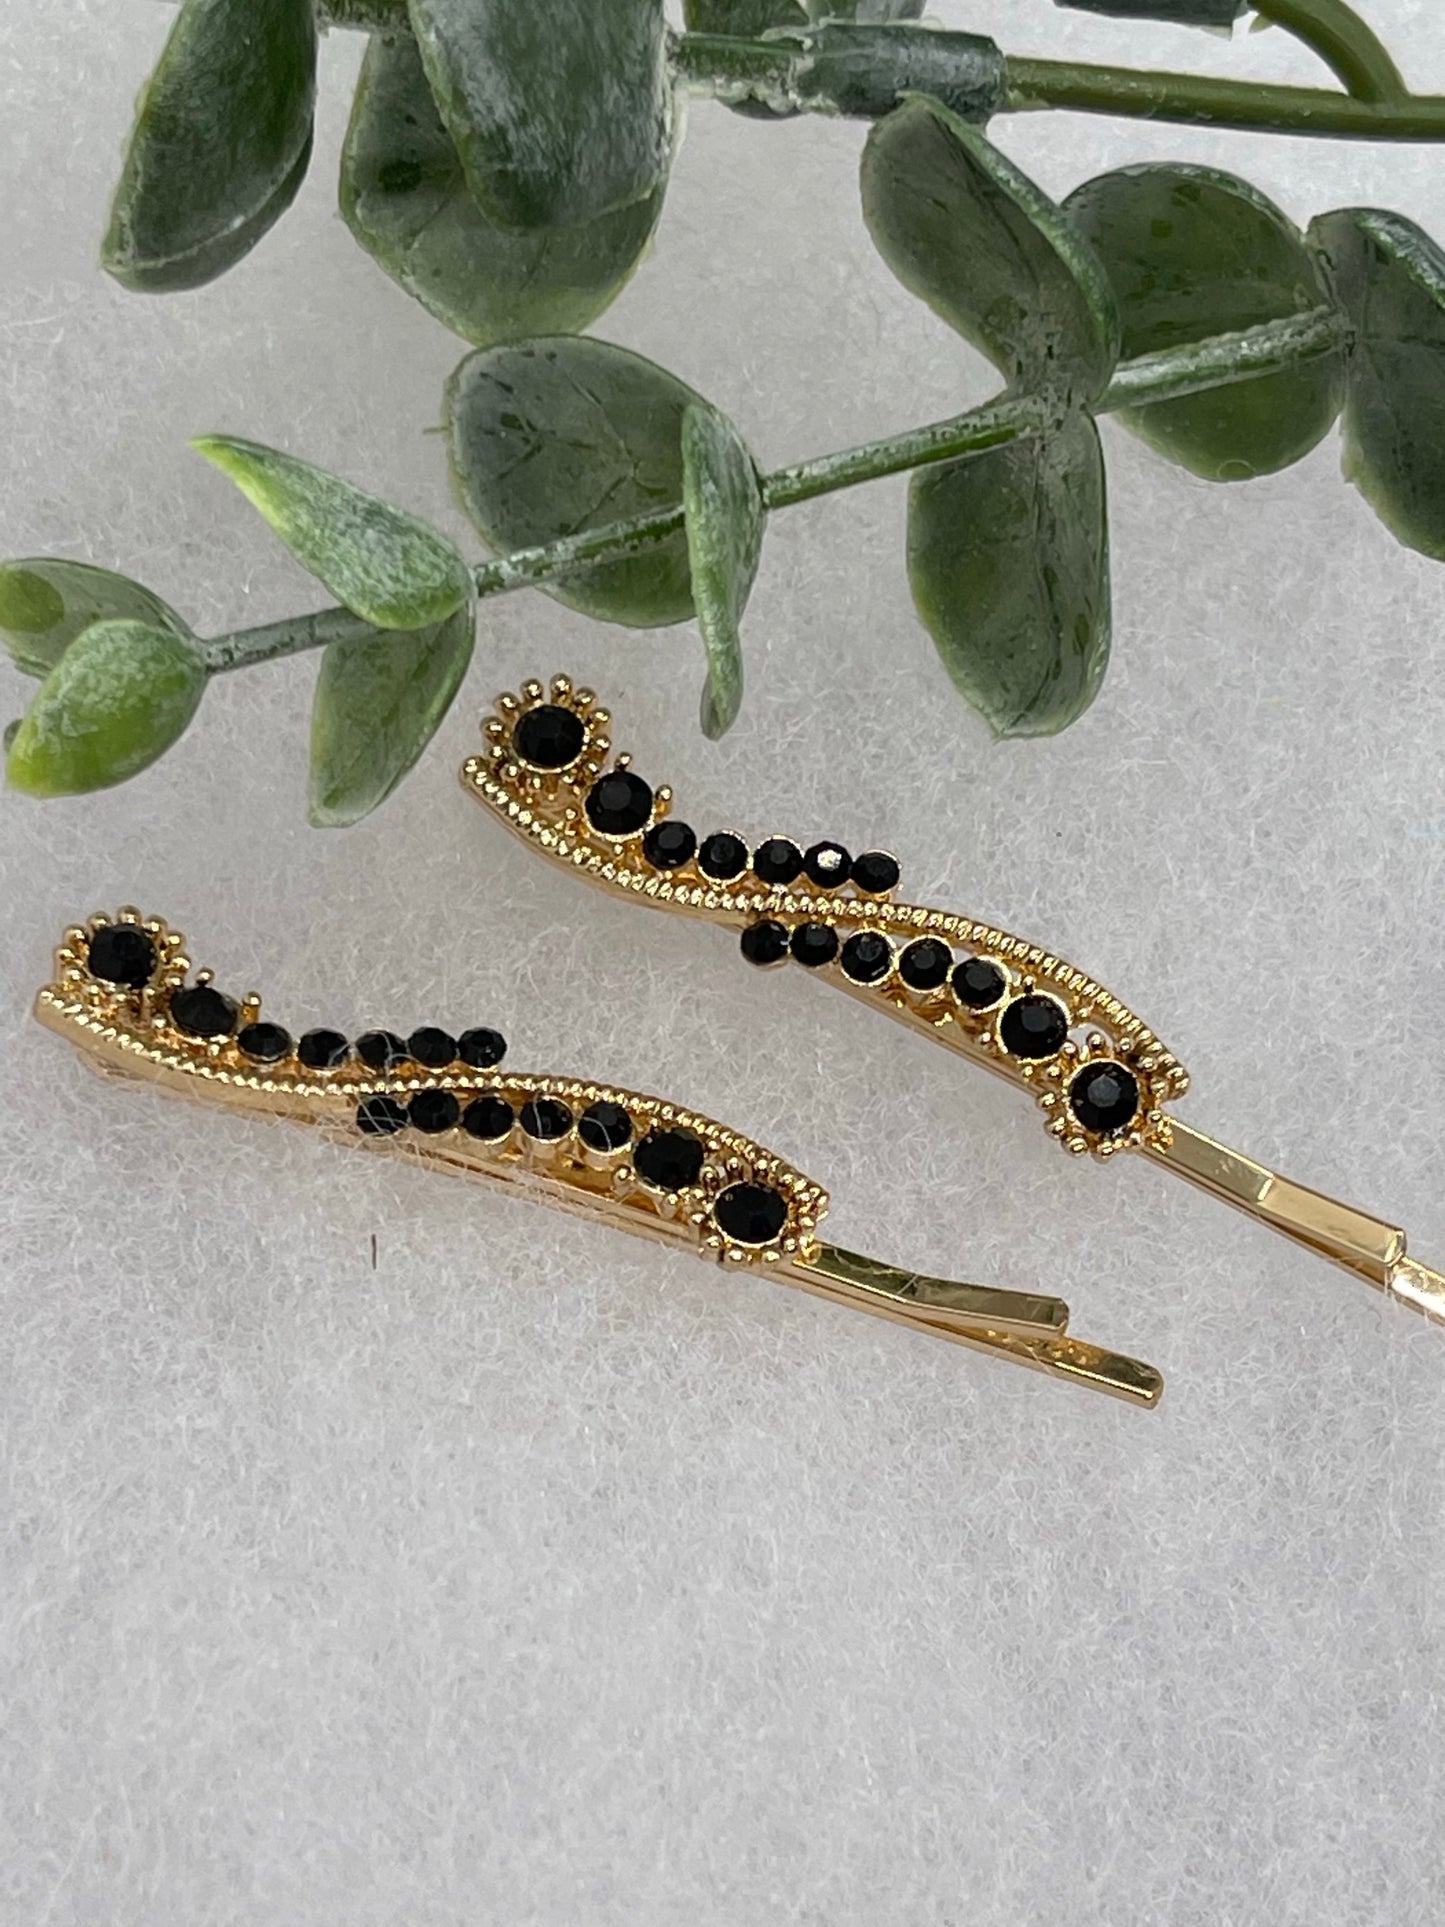 Black crystal rhinestone approximately 2.0” gold tone hair pins 2 pc set wedding bridal shower engagement formal princess accessory accessories